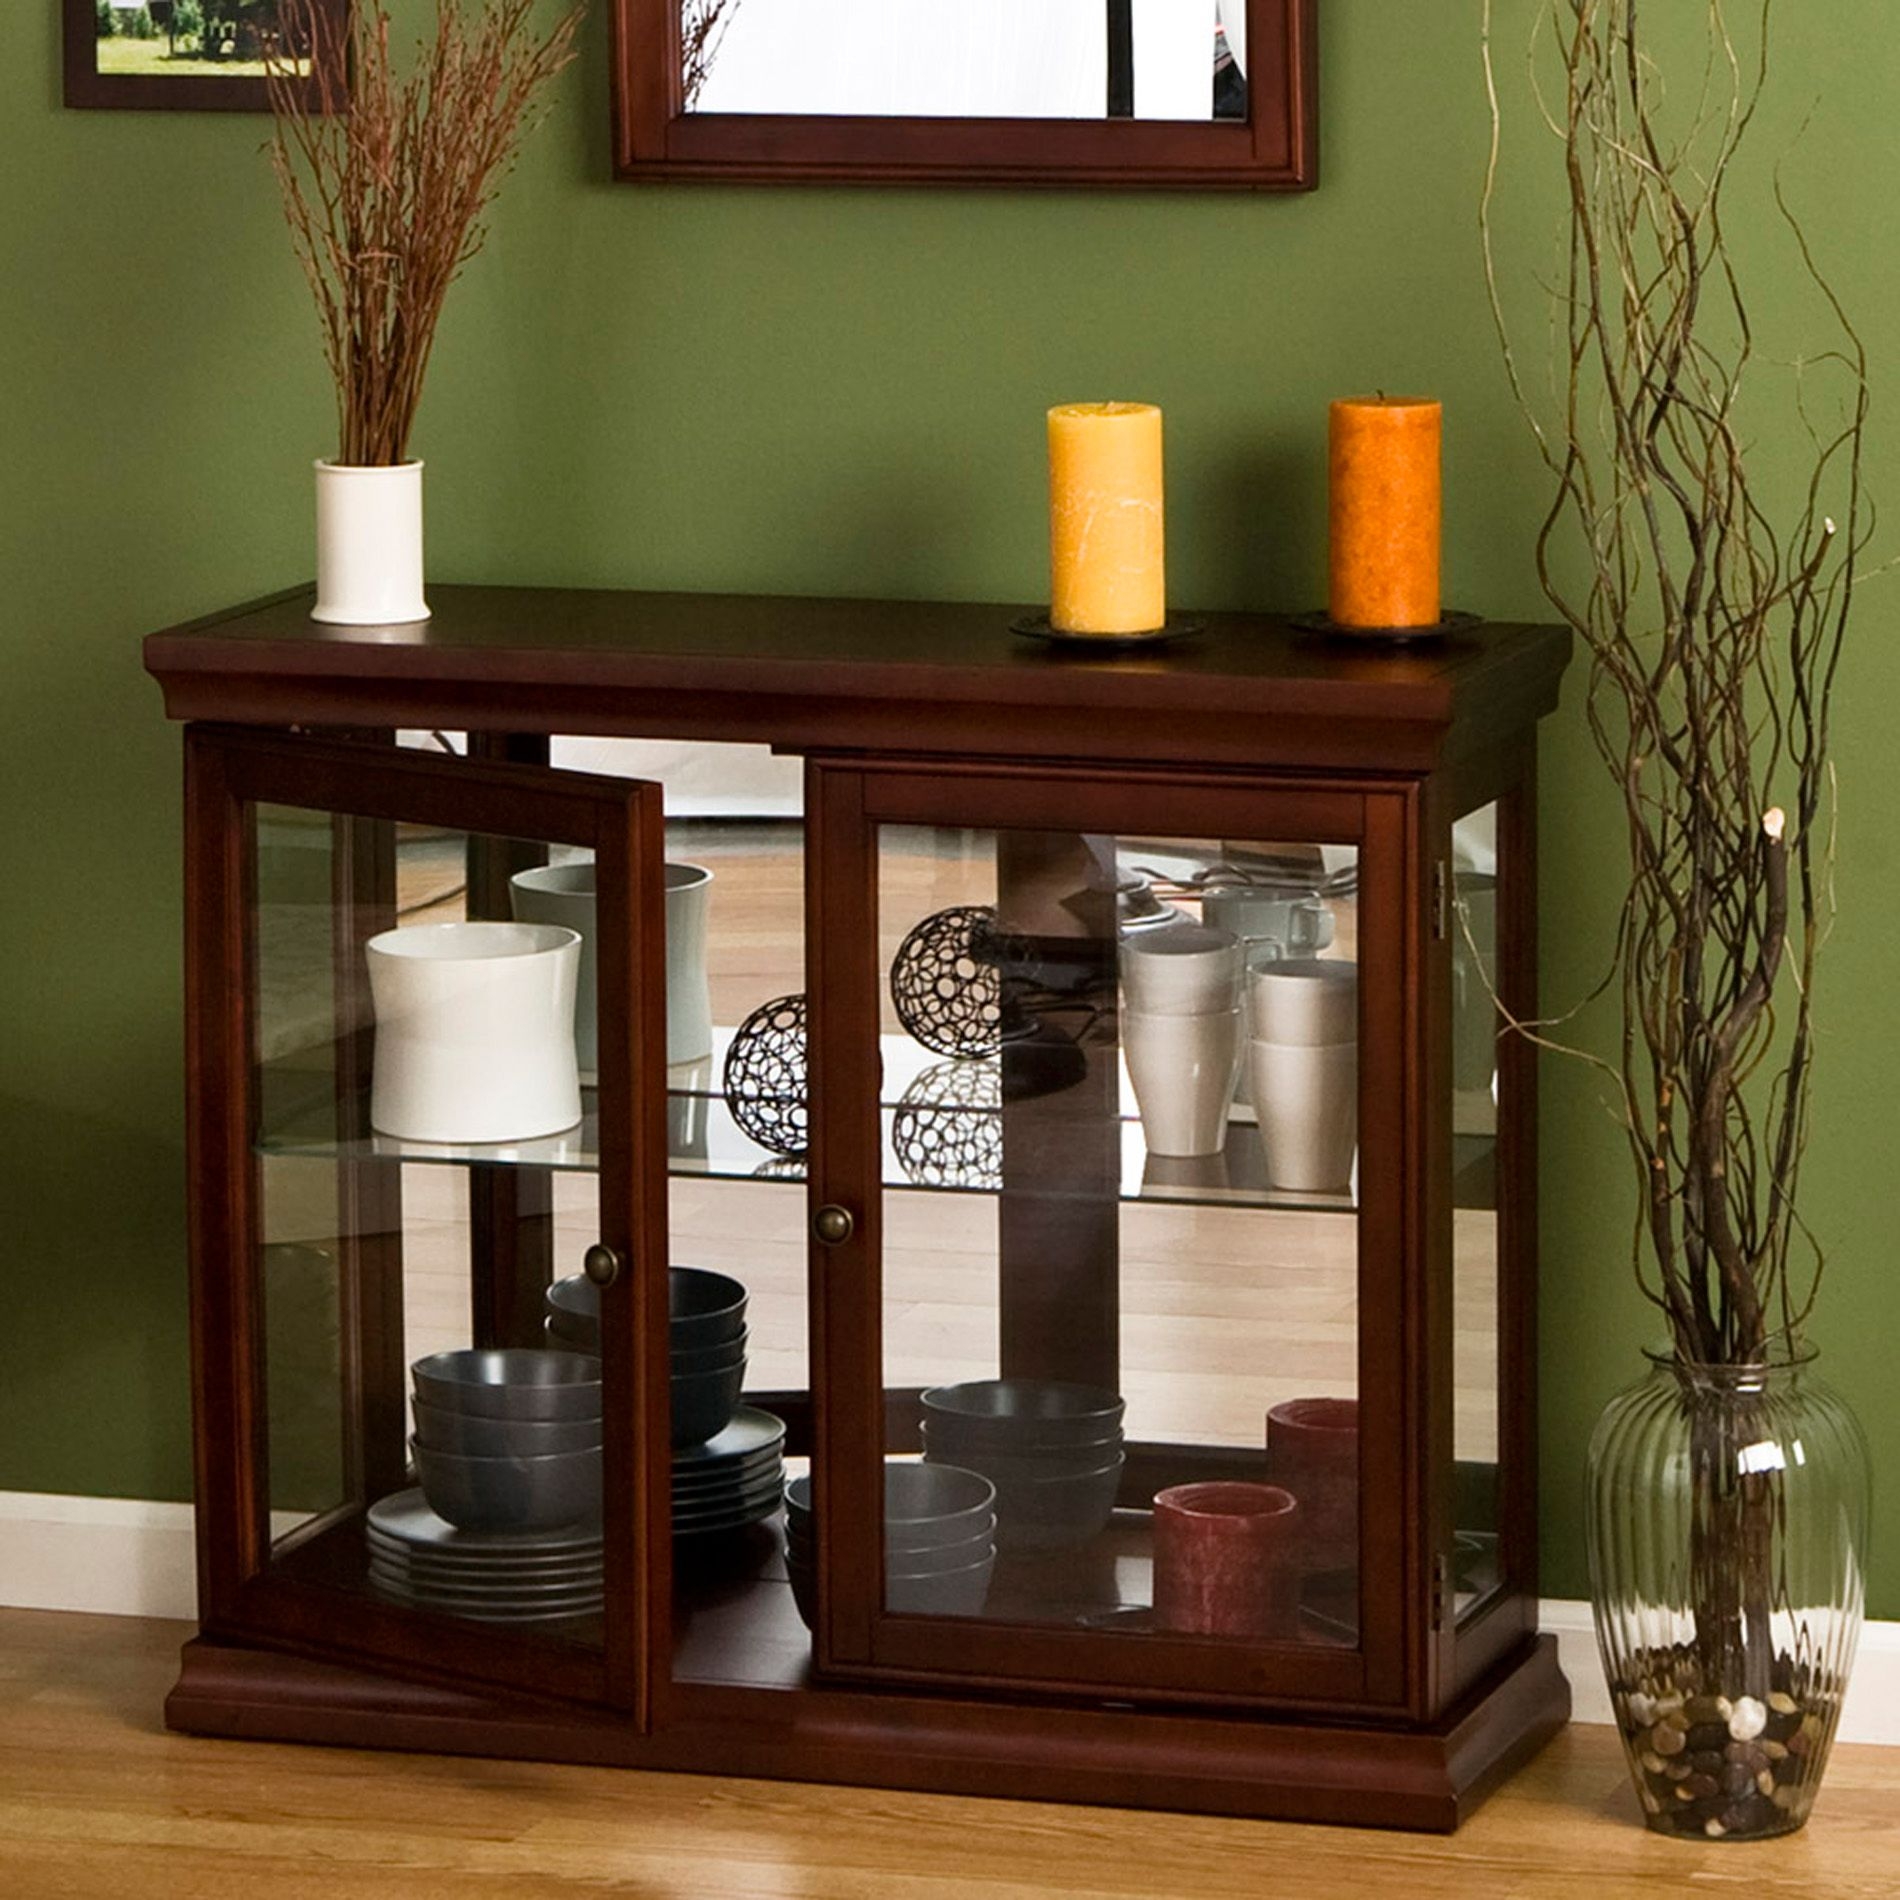 SEI Mahogany Curio Cabinet with Double Tempered-Glass Doors